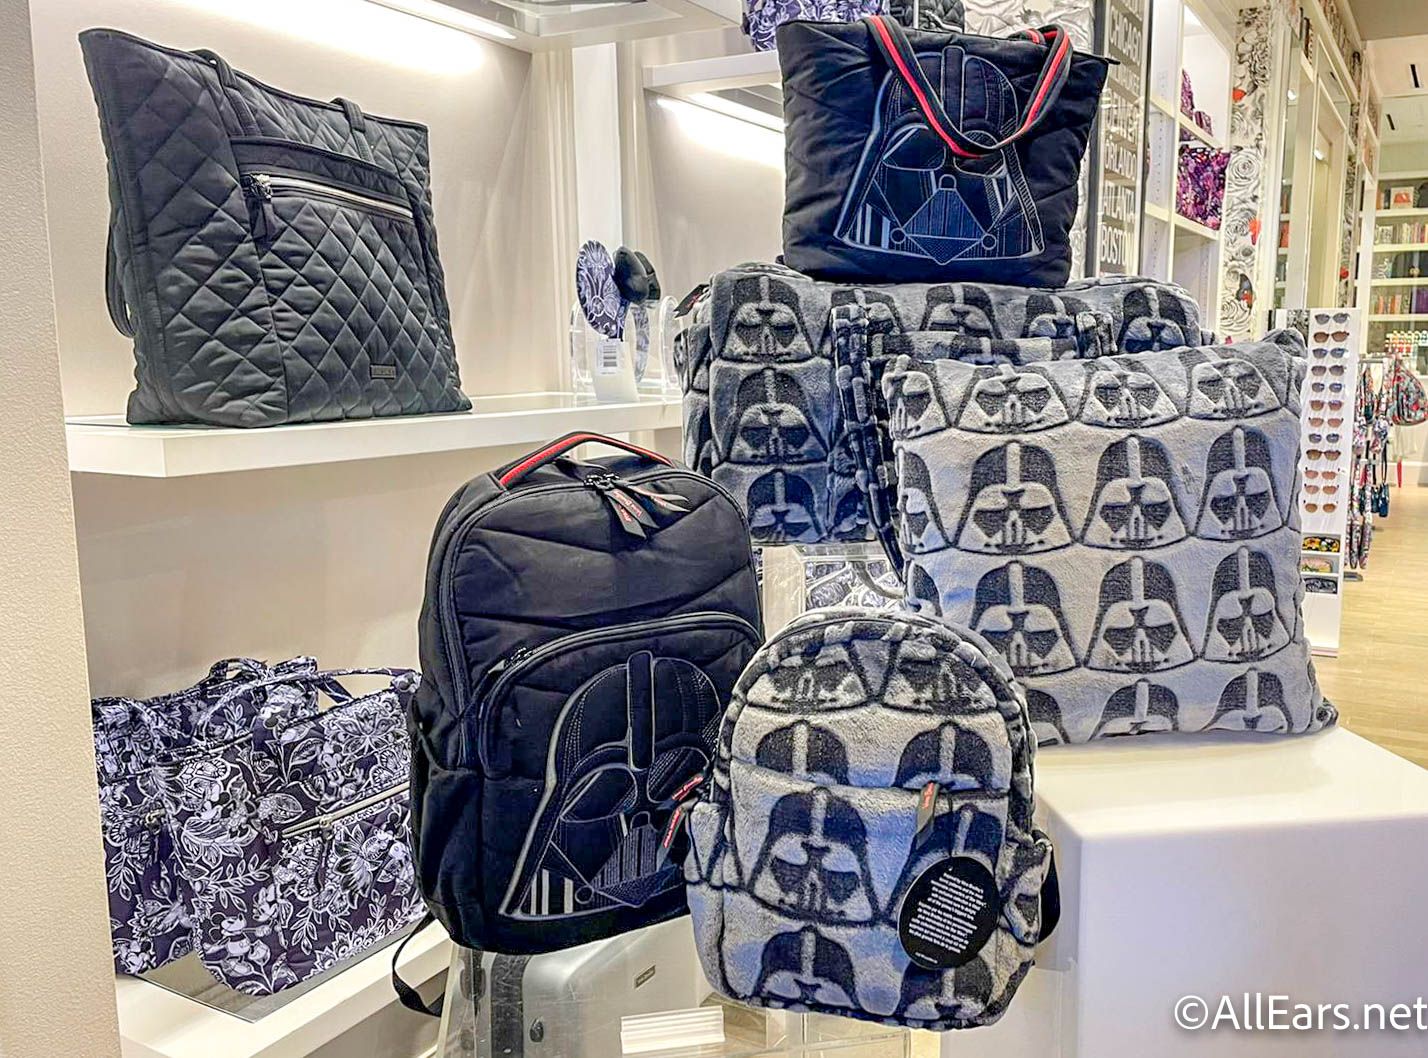 These New Disney x Vera Bradley Bags Are Paisley Perfection